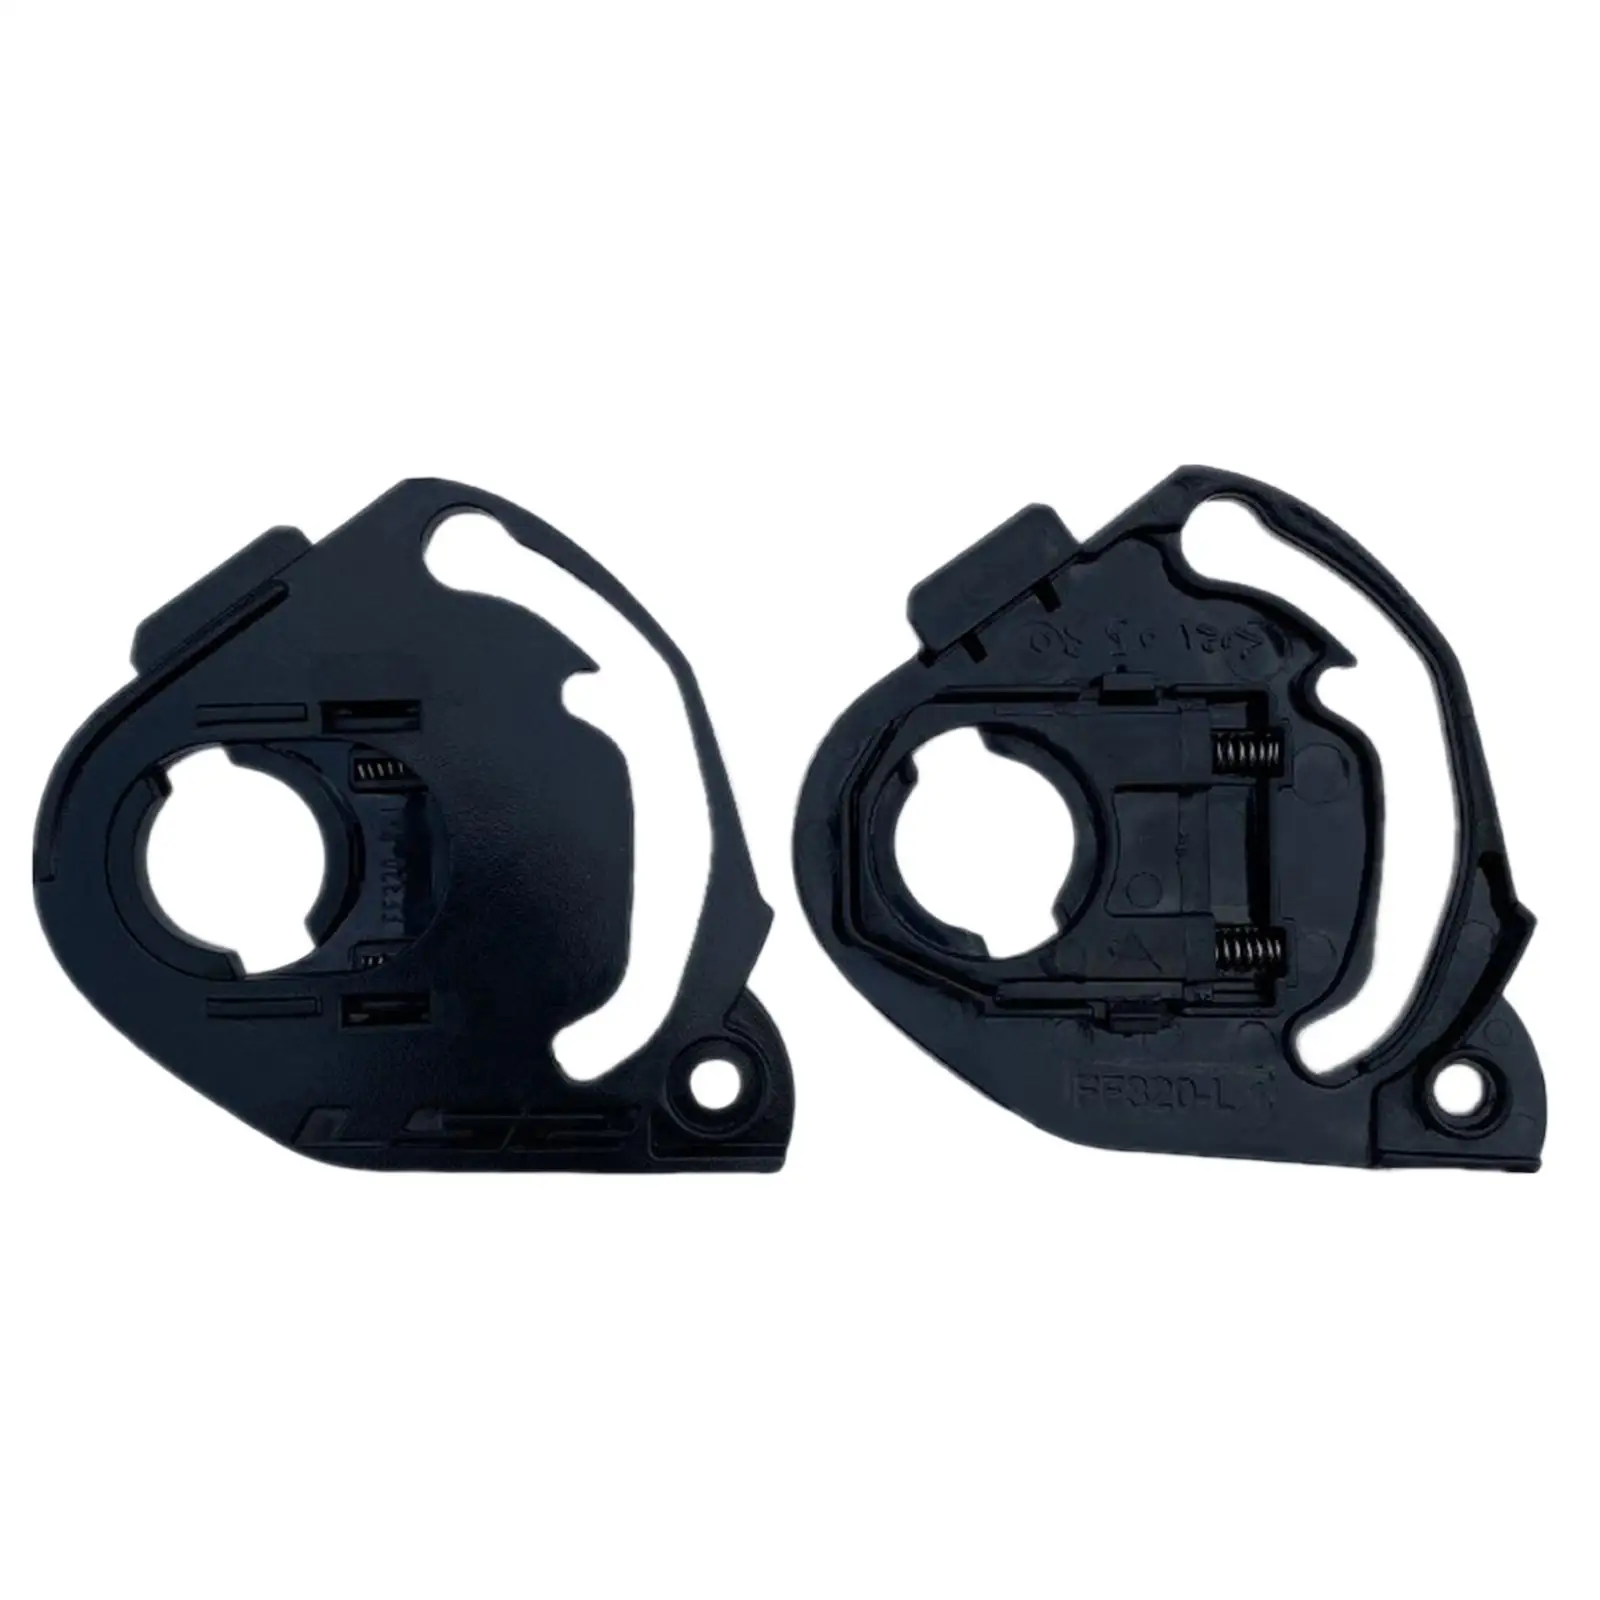 2 Pieces Motorcycle Accessories Fit for Ff328 Ff800 Ff320